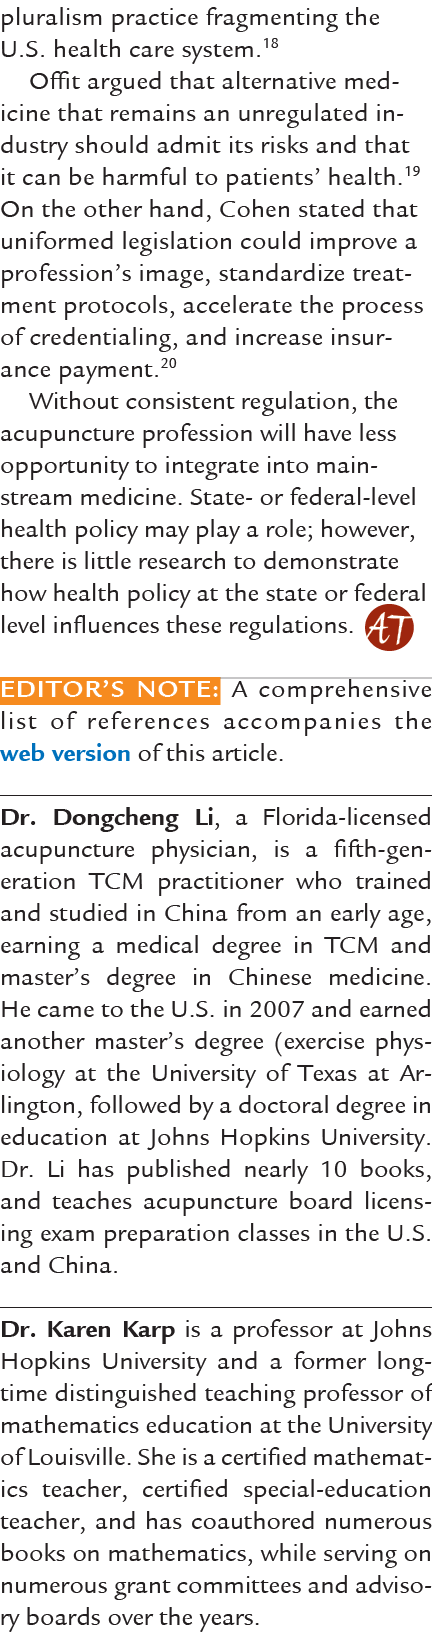 pluralism practice fragmenting the U.S. health care system.18 Offit argued that alternative medicine that remains an ...